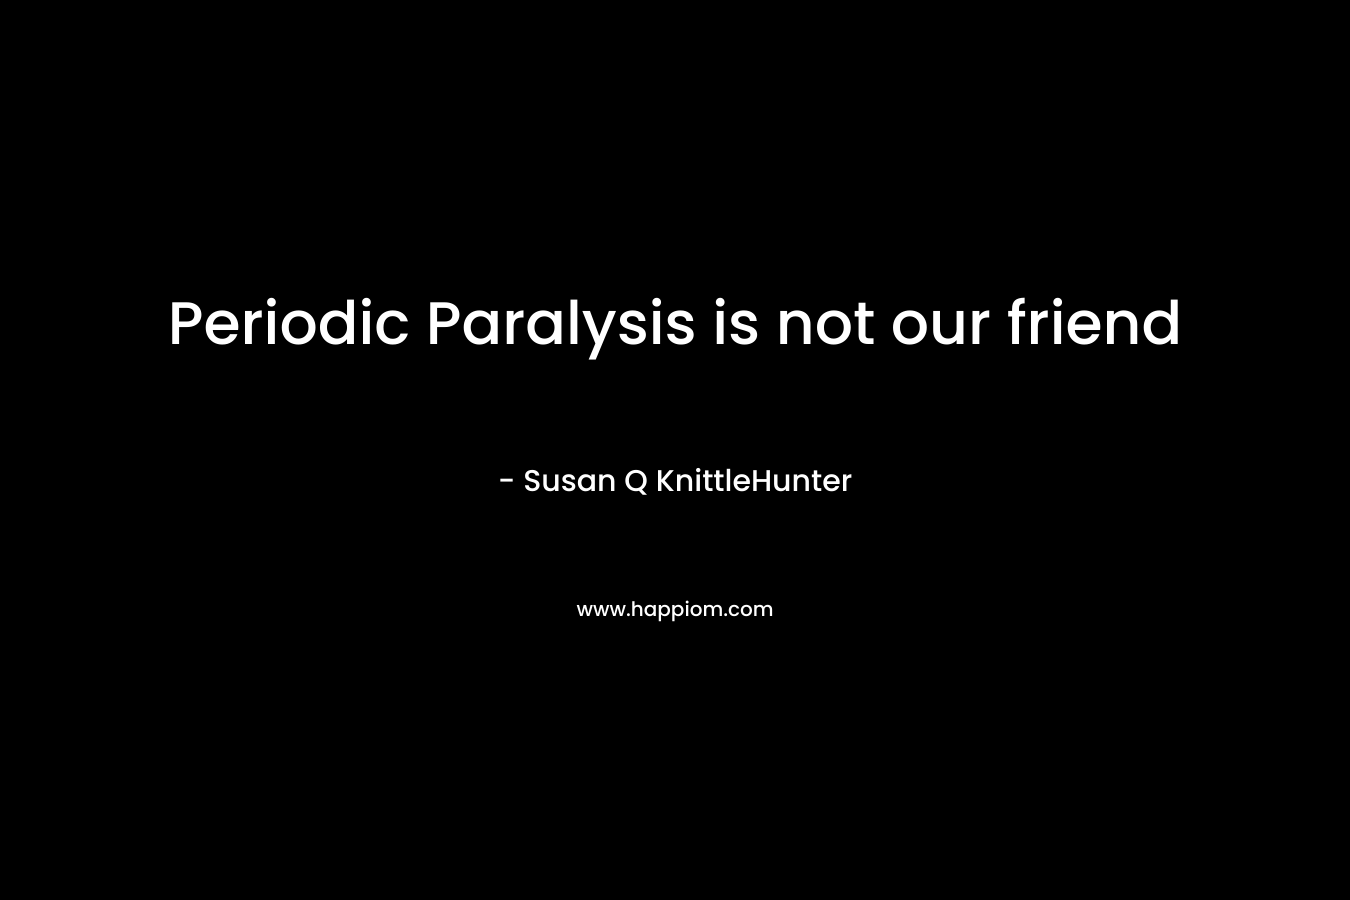 Periodic Paralysis is not our friend – Susan Q KnittleHunter